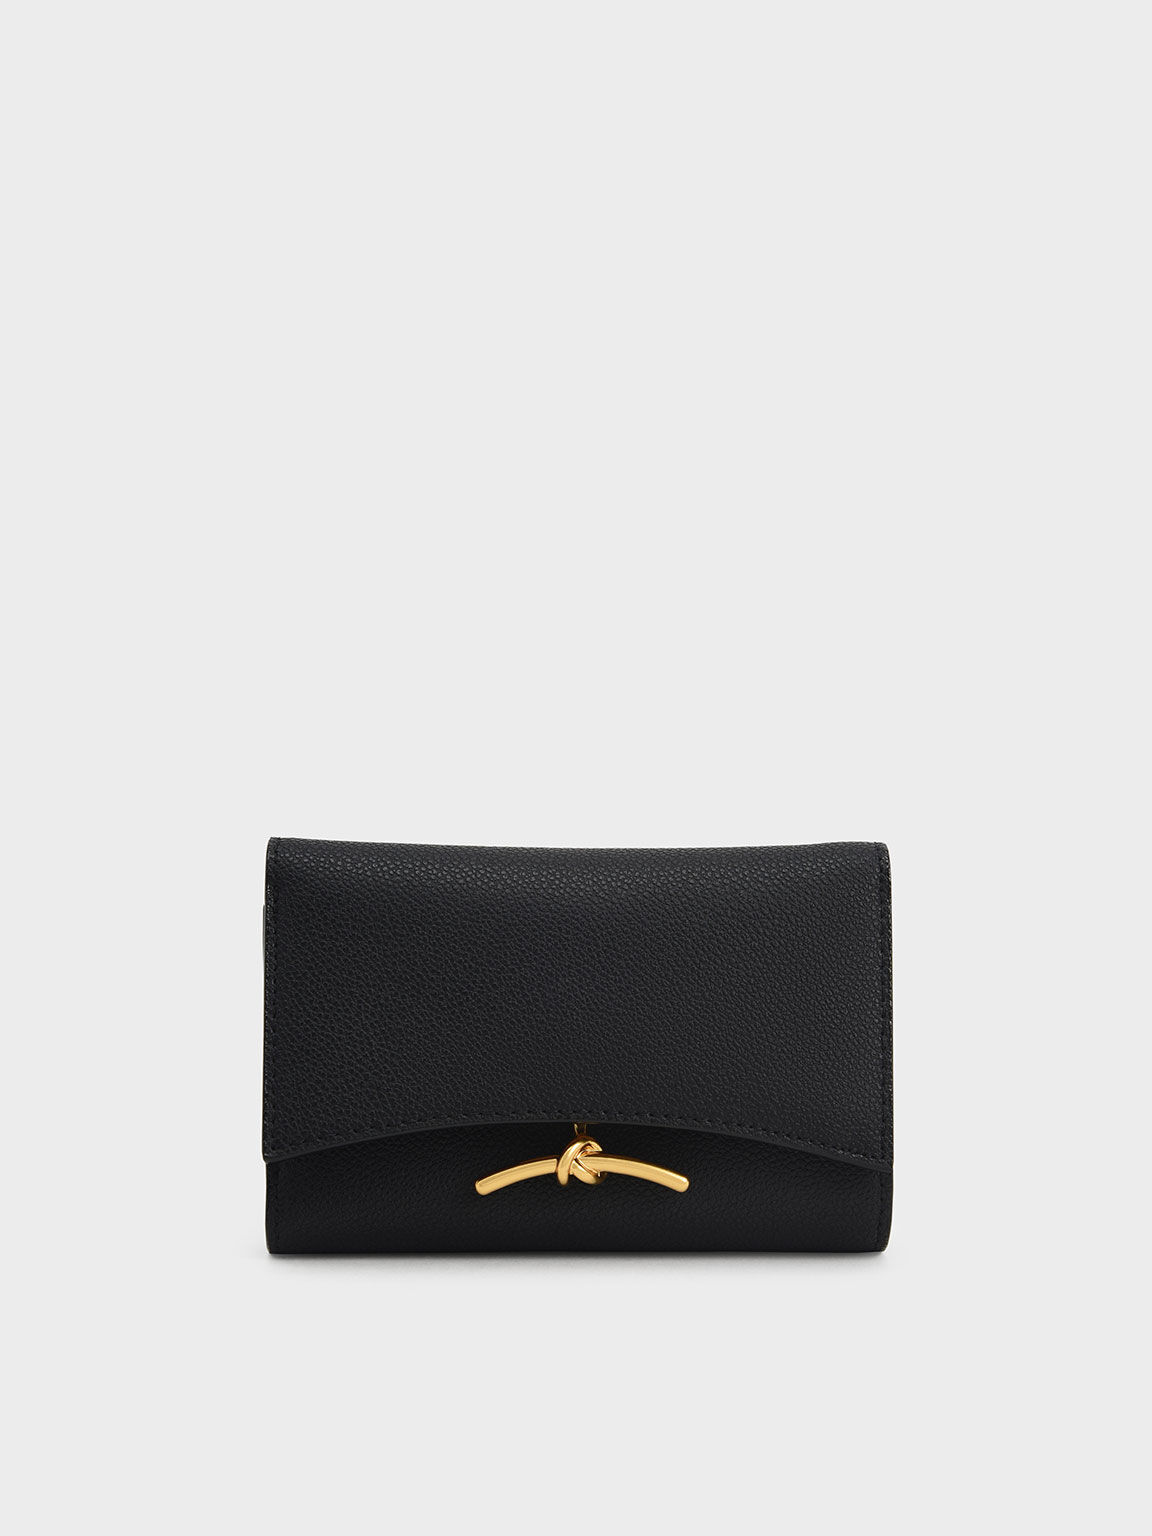 Charles & Keith Leather Wallets for Women